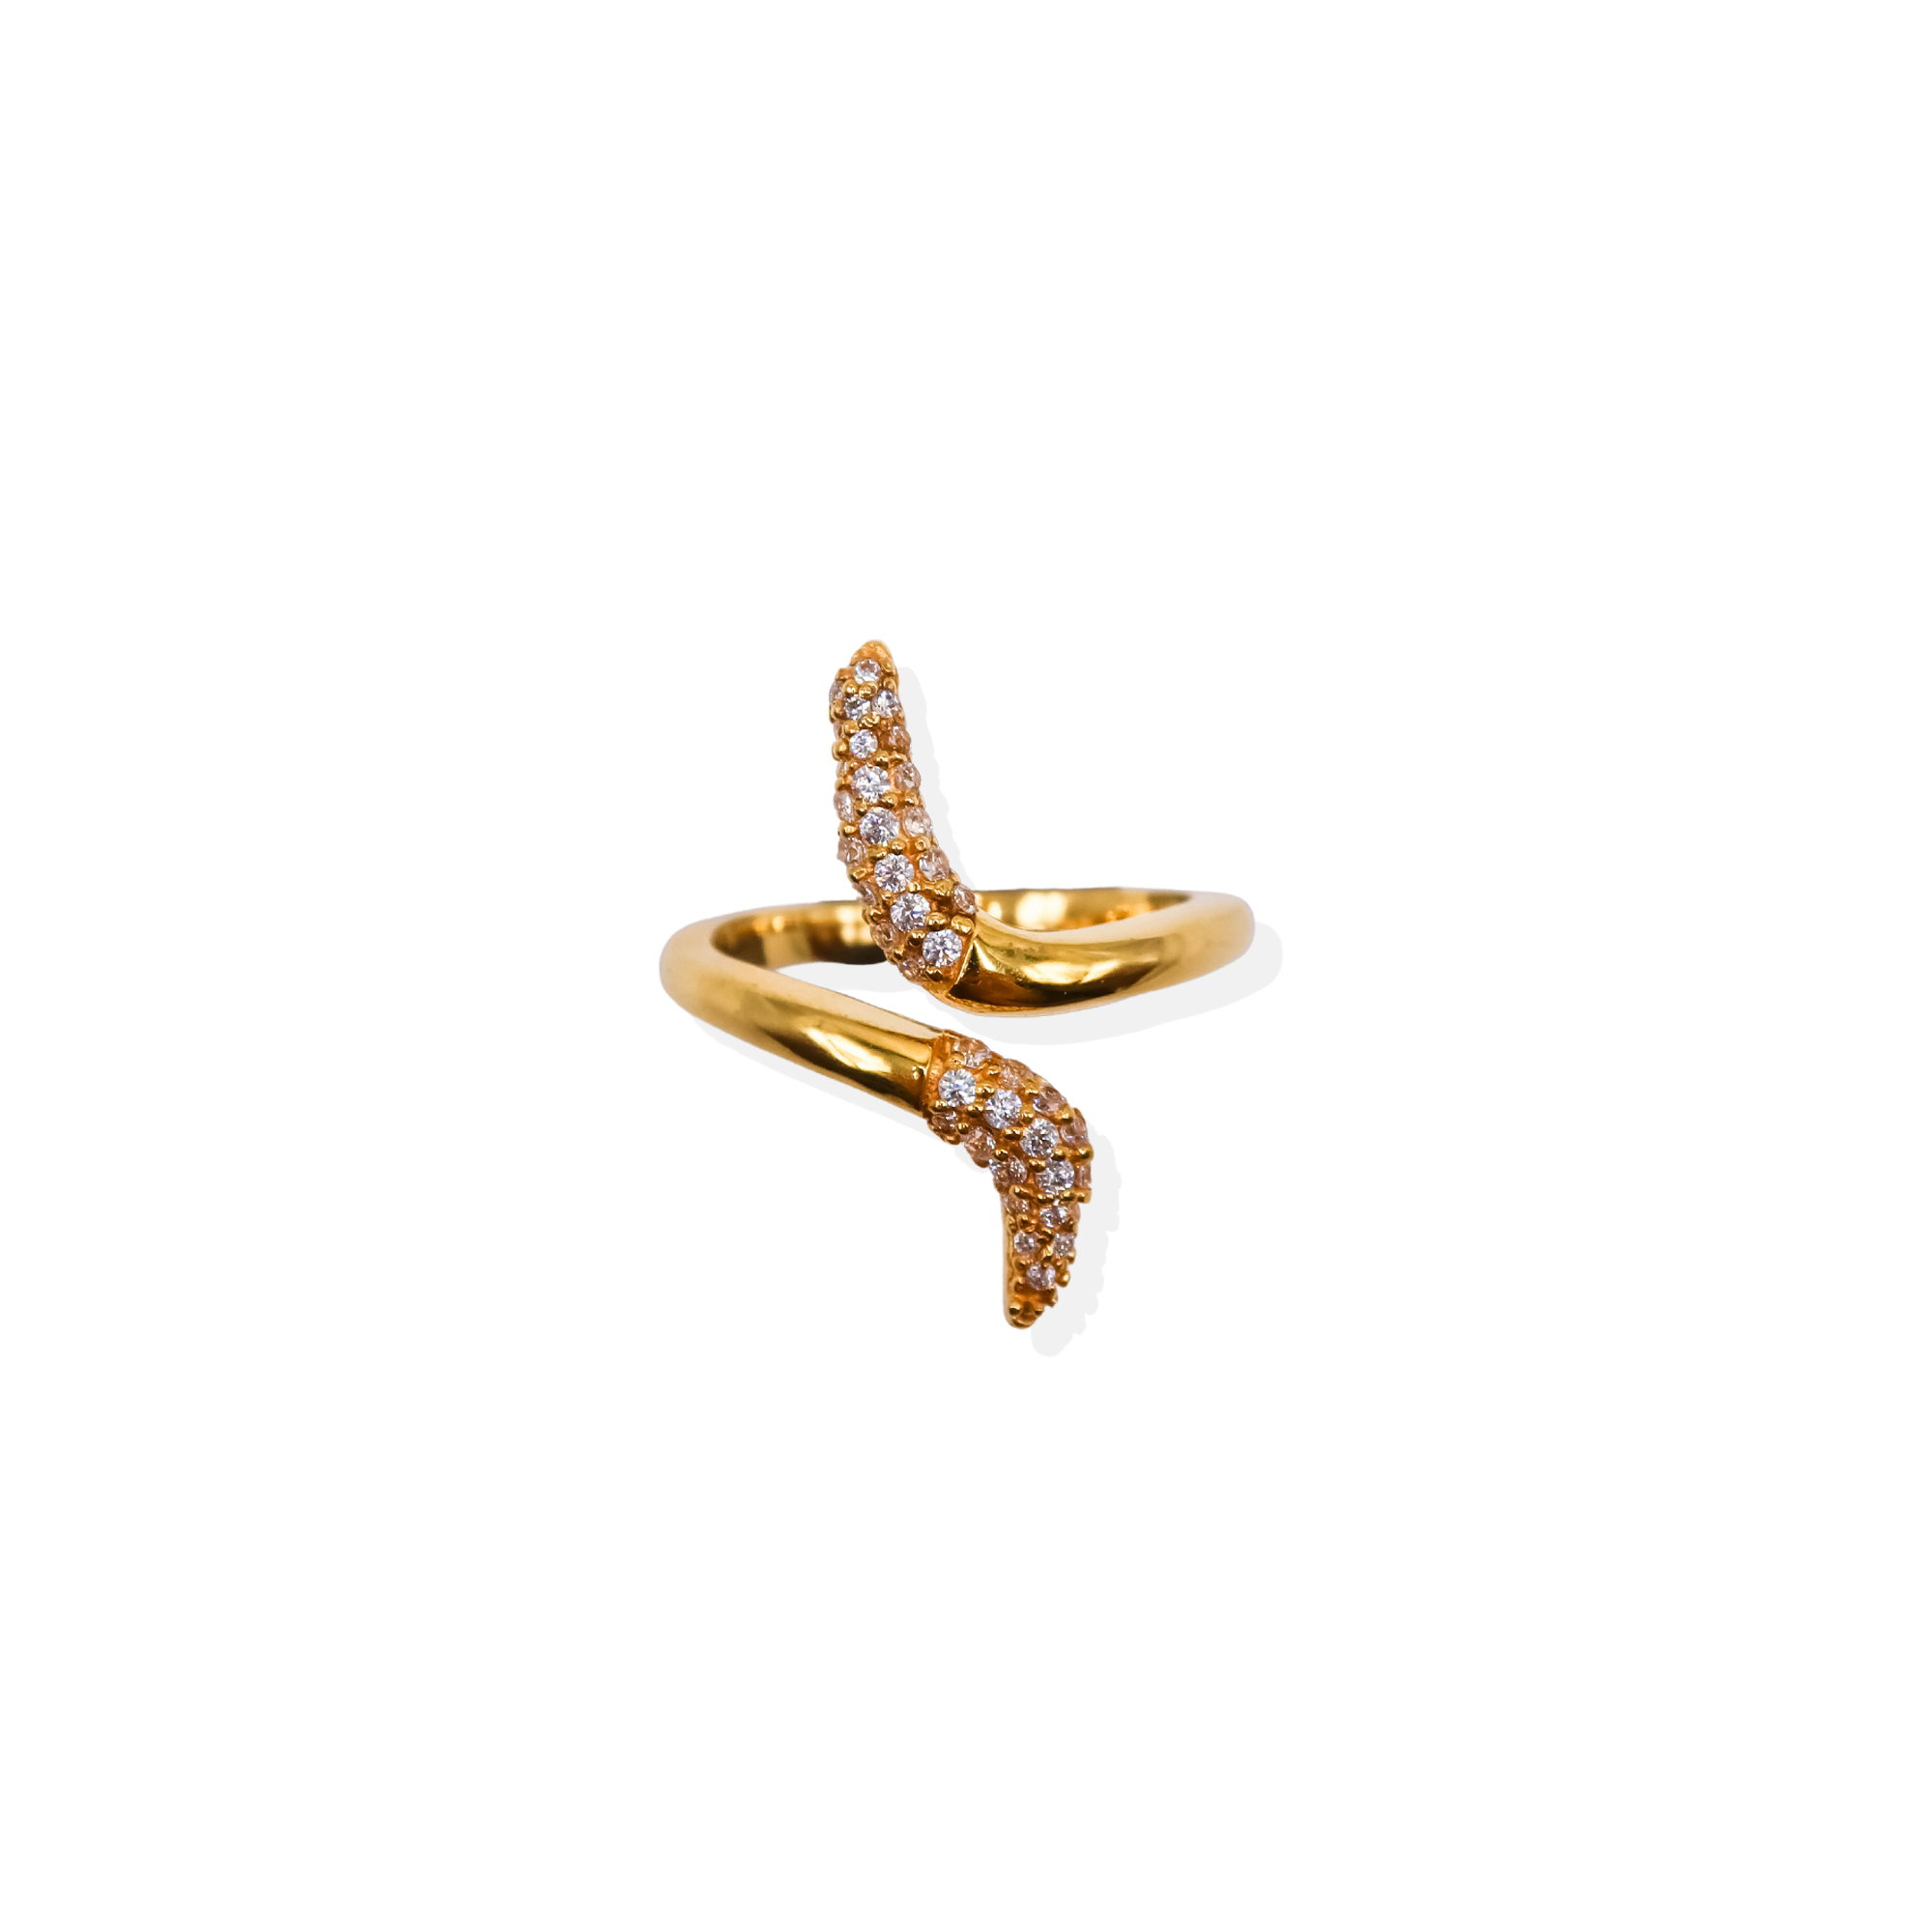 Ava Gold Wrapped Ring